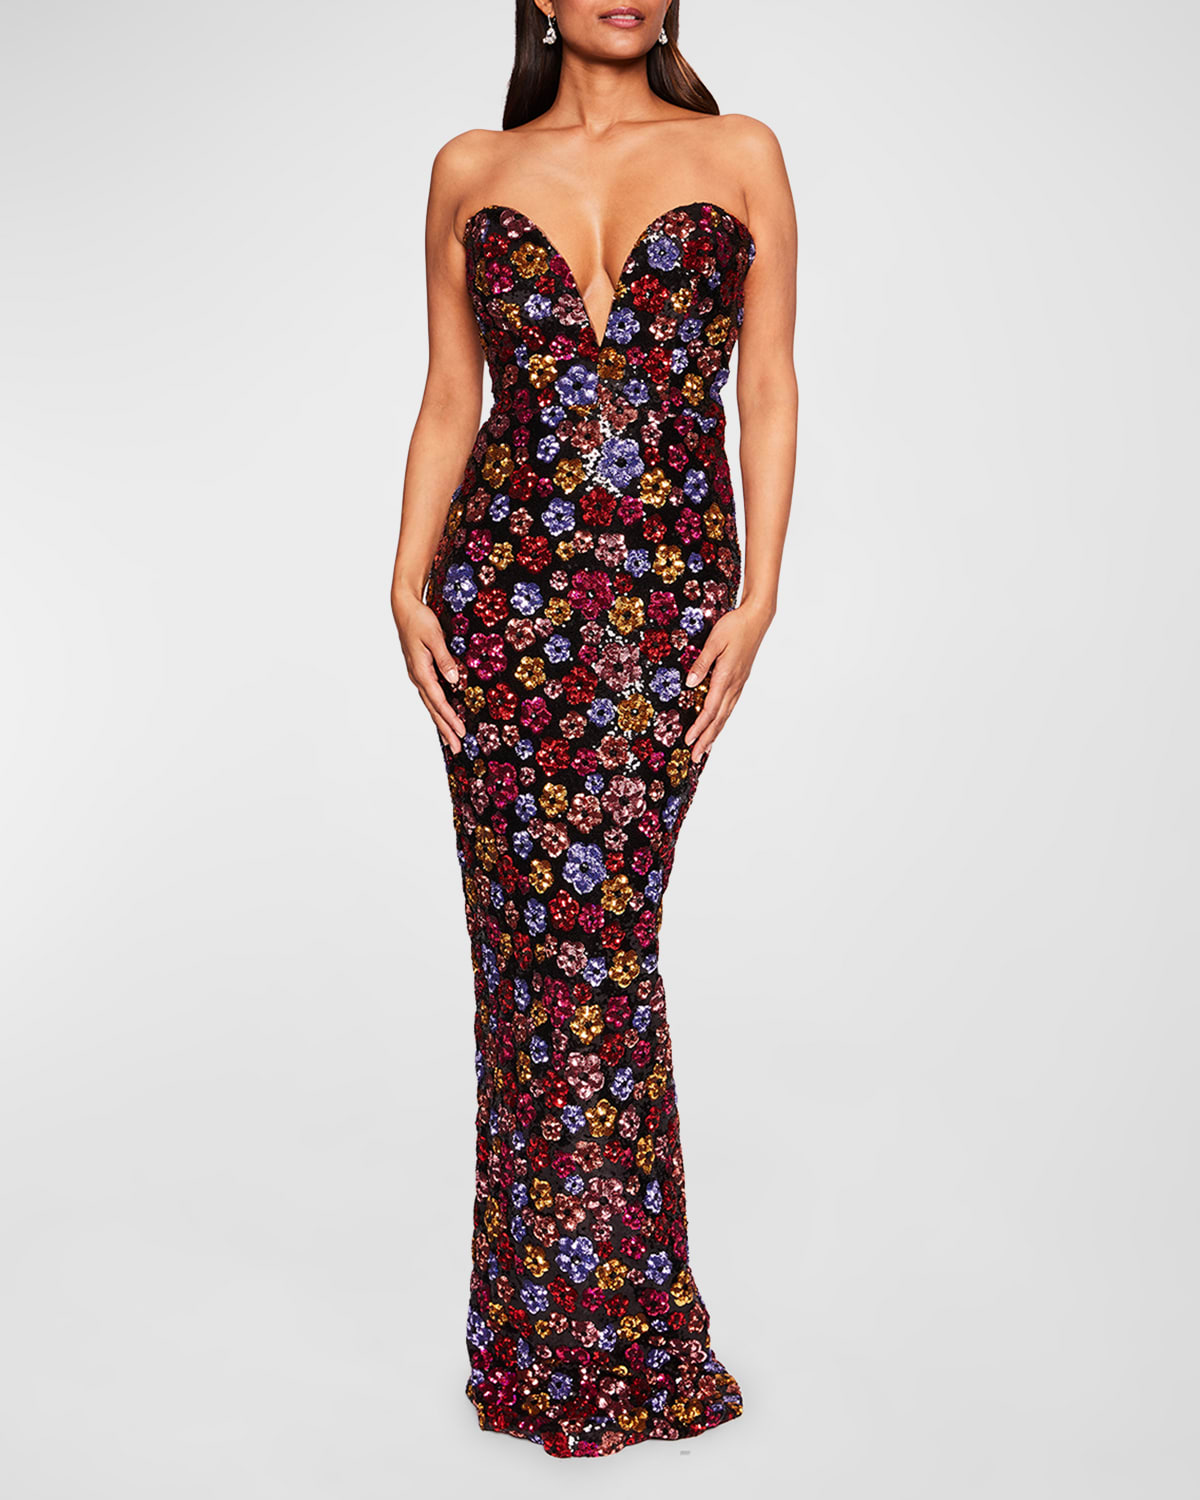 MARCHESA NOTTE STRAPLESS PLUNGING FLORAL SEQUIN COLUMN GOWN